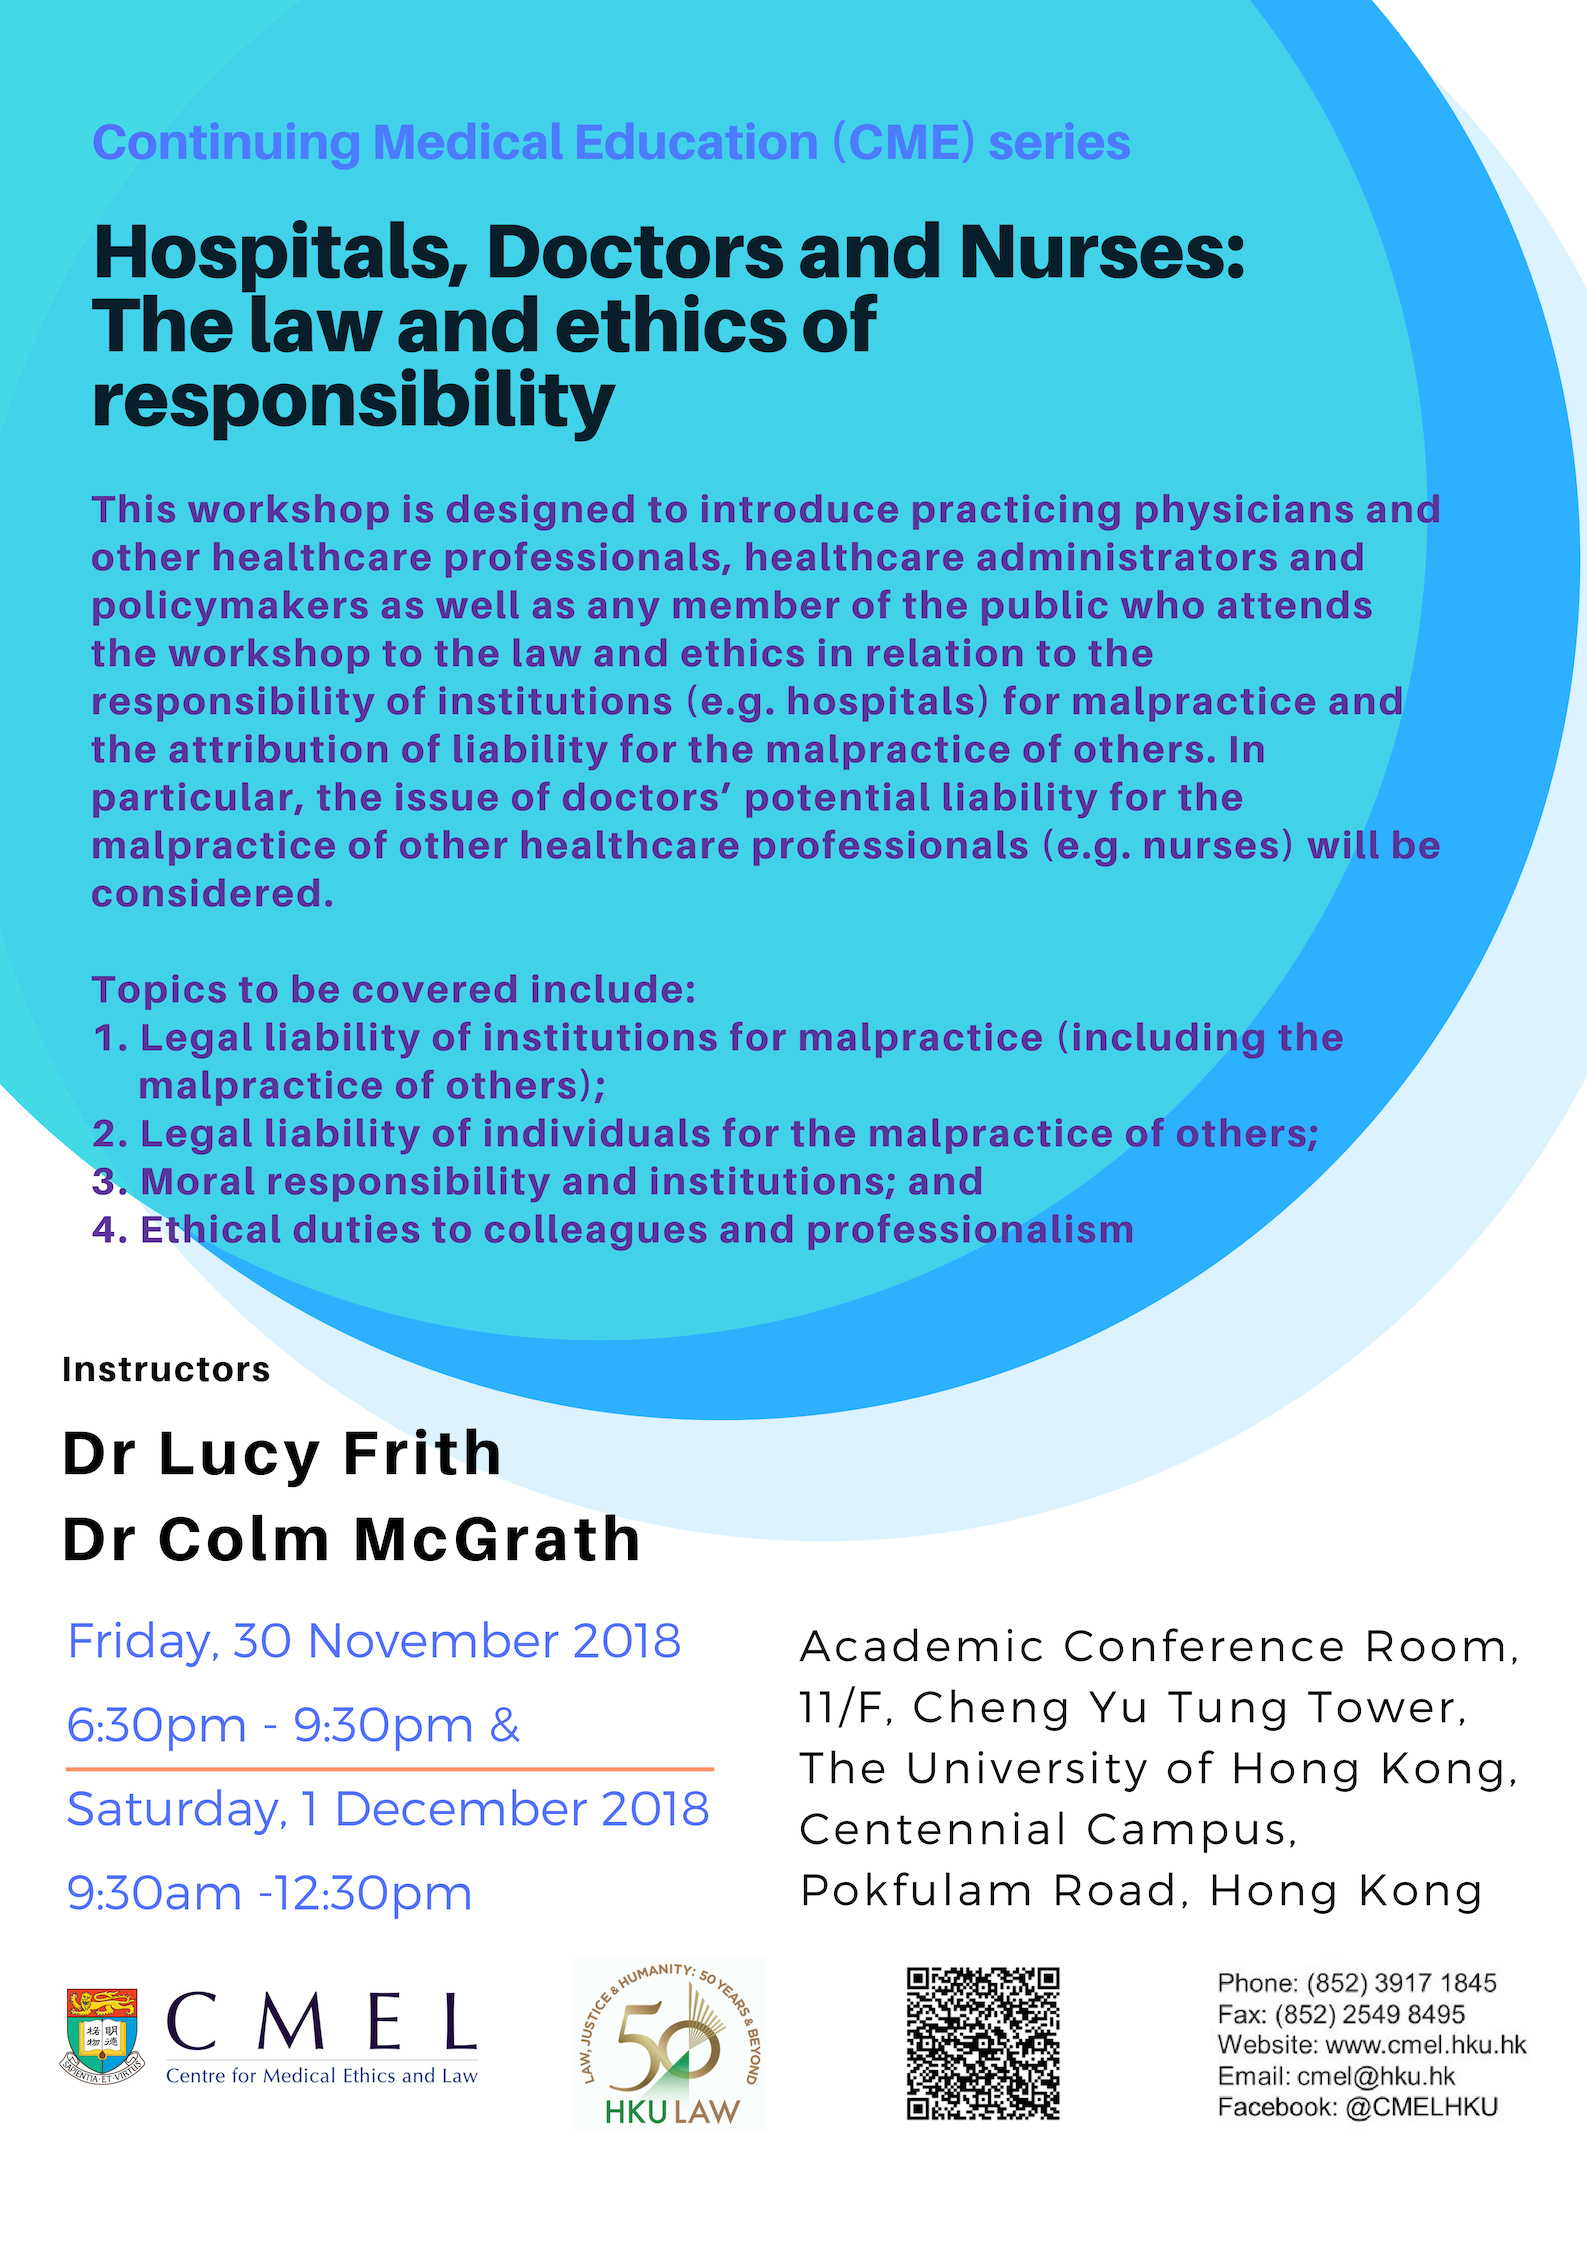 CME Workshop Hospitals, Doctors and Nurses: The law and ethics of responsibility on 30 November and 1 December 2018